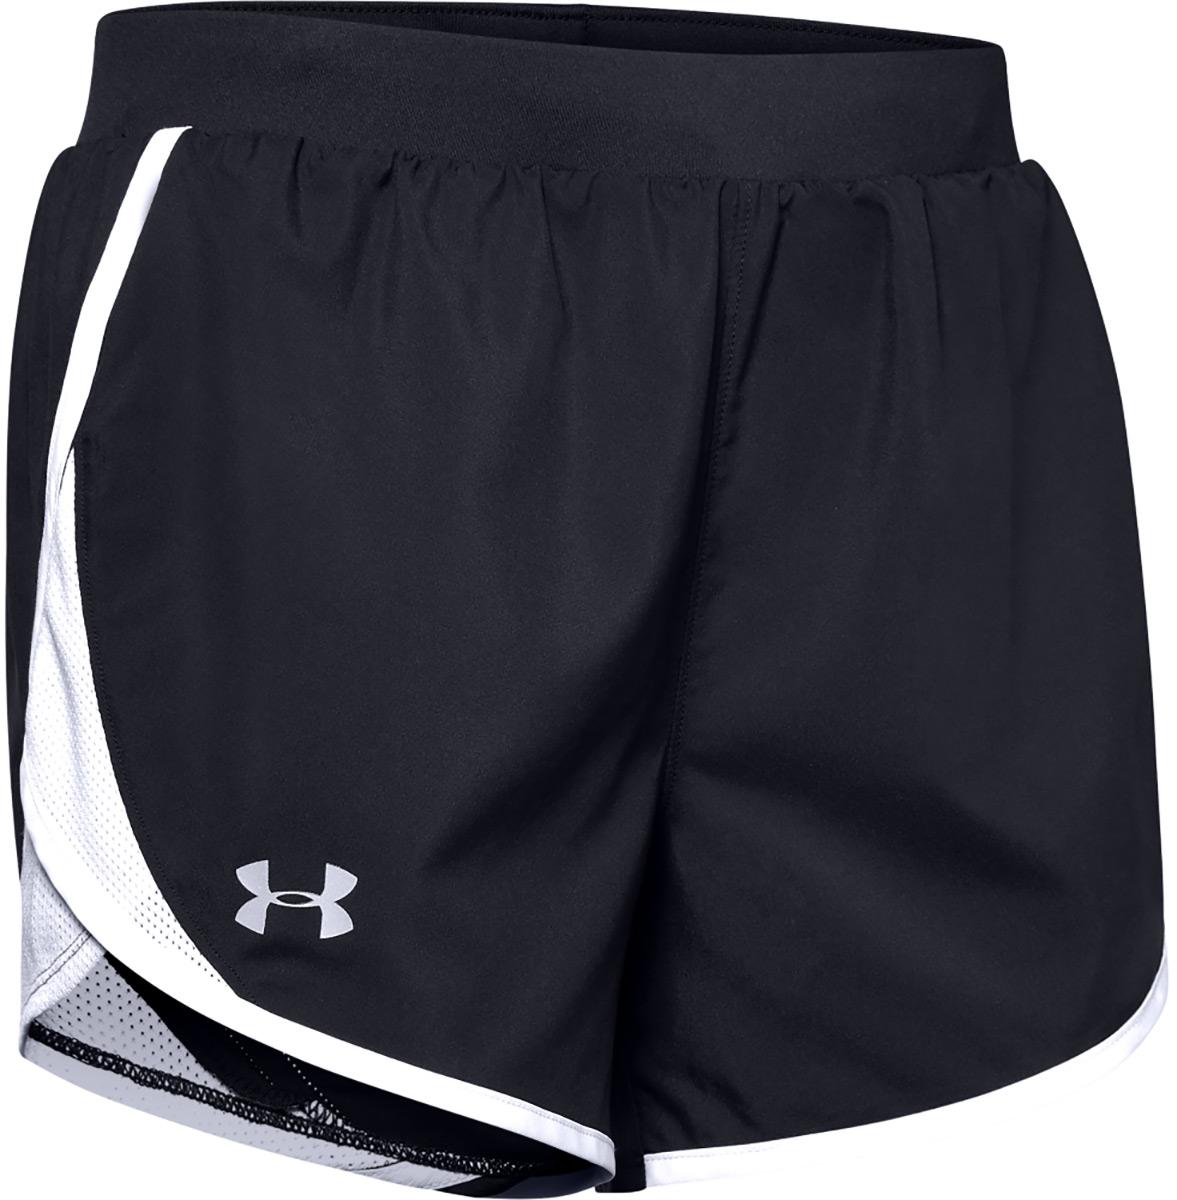 Under Armour Womens Fly By 2.0 Short - Black / White / Reflective